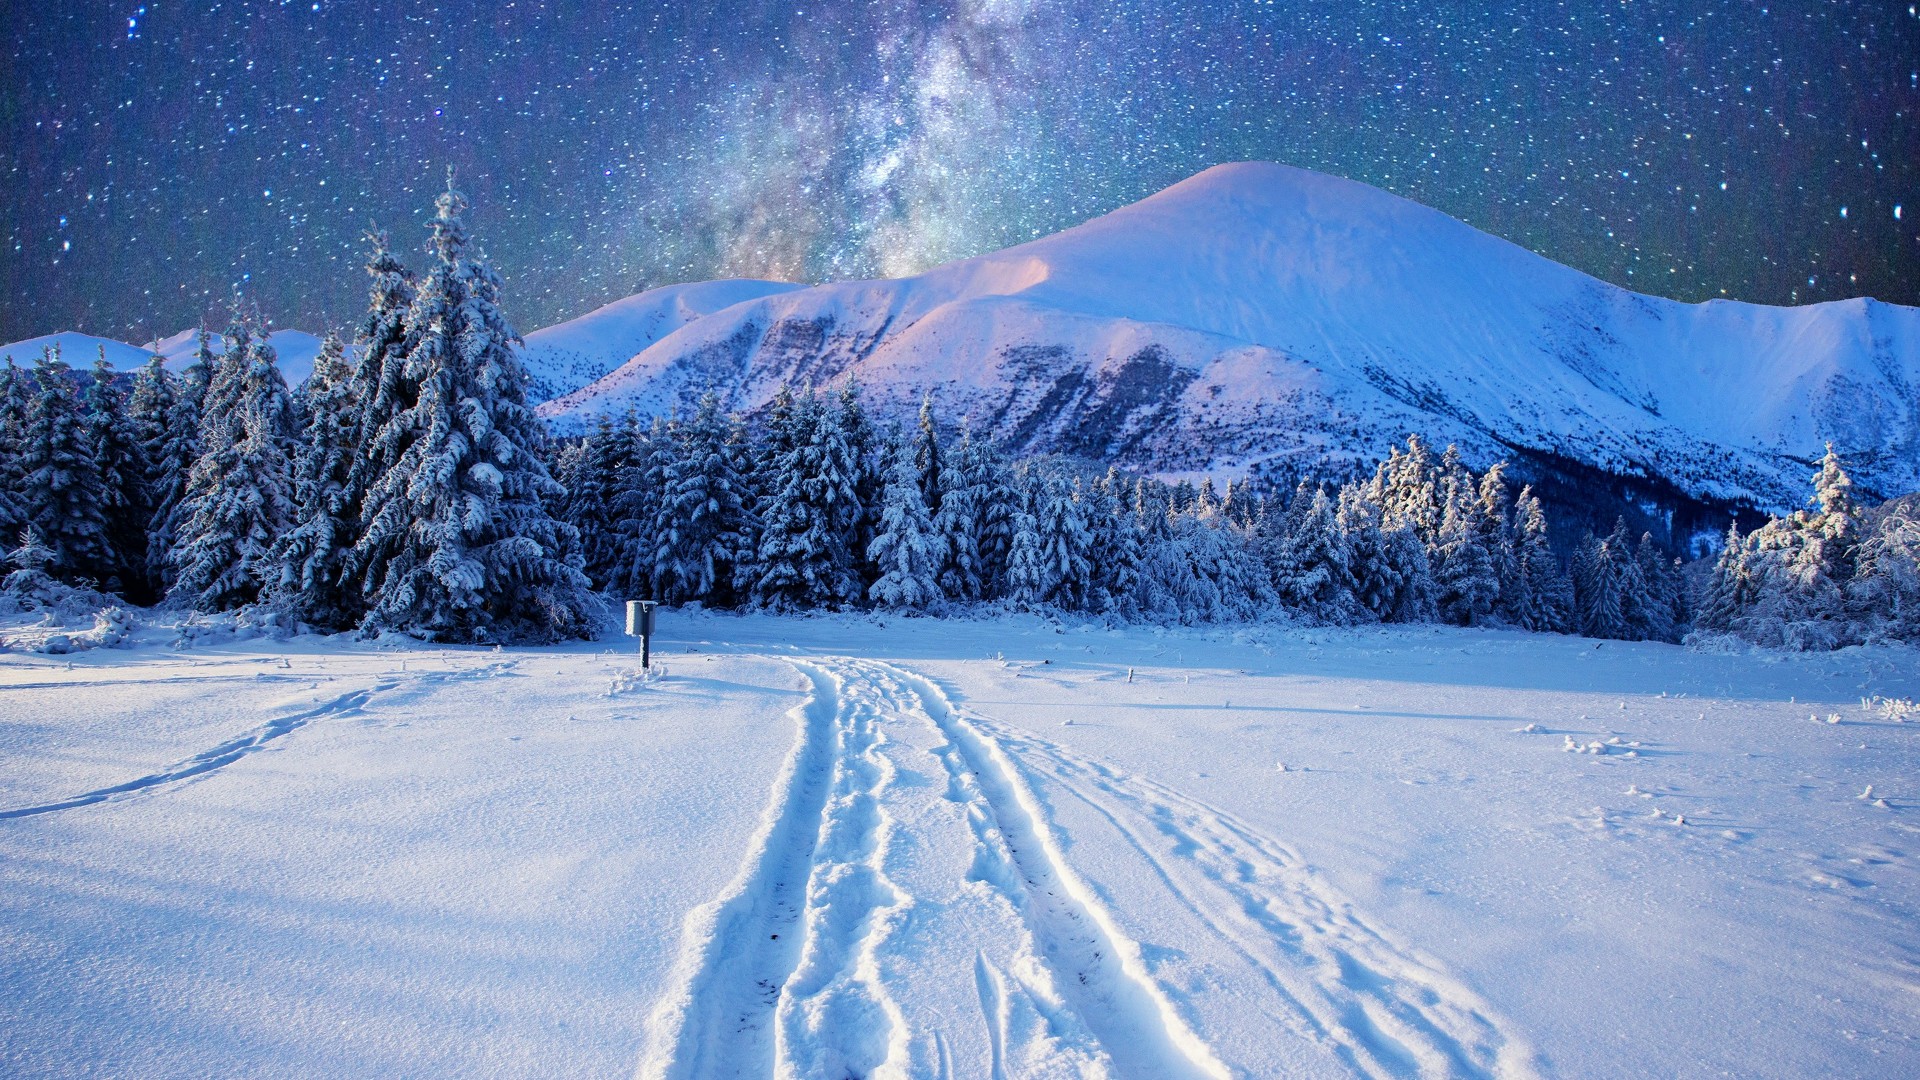 Milky Way On The Night Sky Over The Snowy Mountains Wallpaper ...